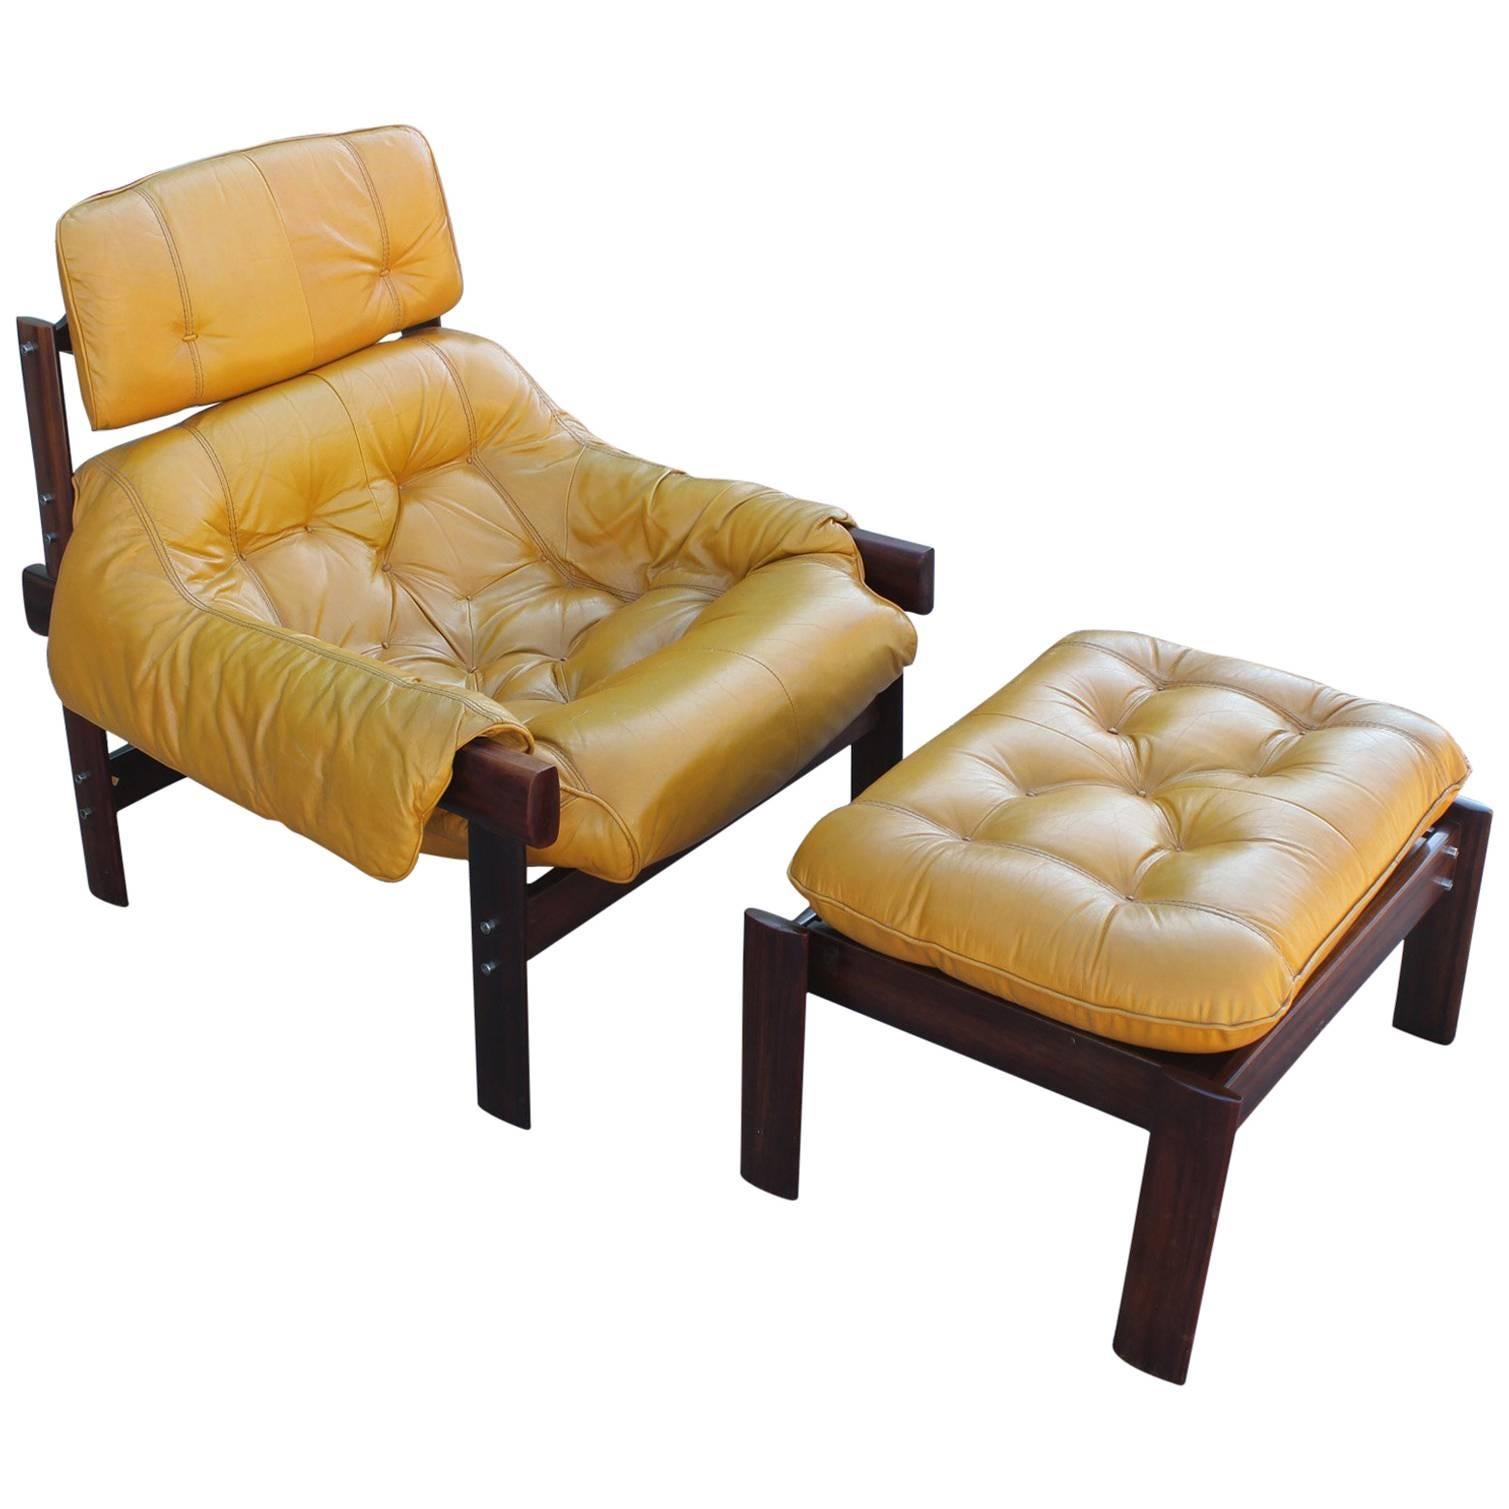 Percival Lafer Brazilian Mustard Yellow Lounge Chair with Ottoman